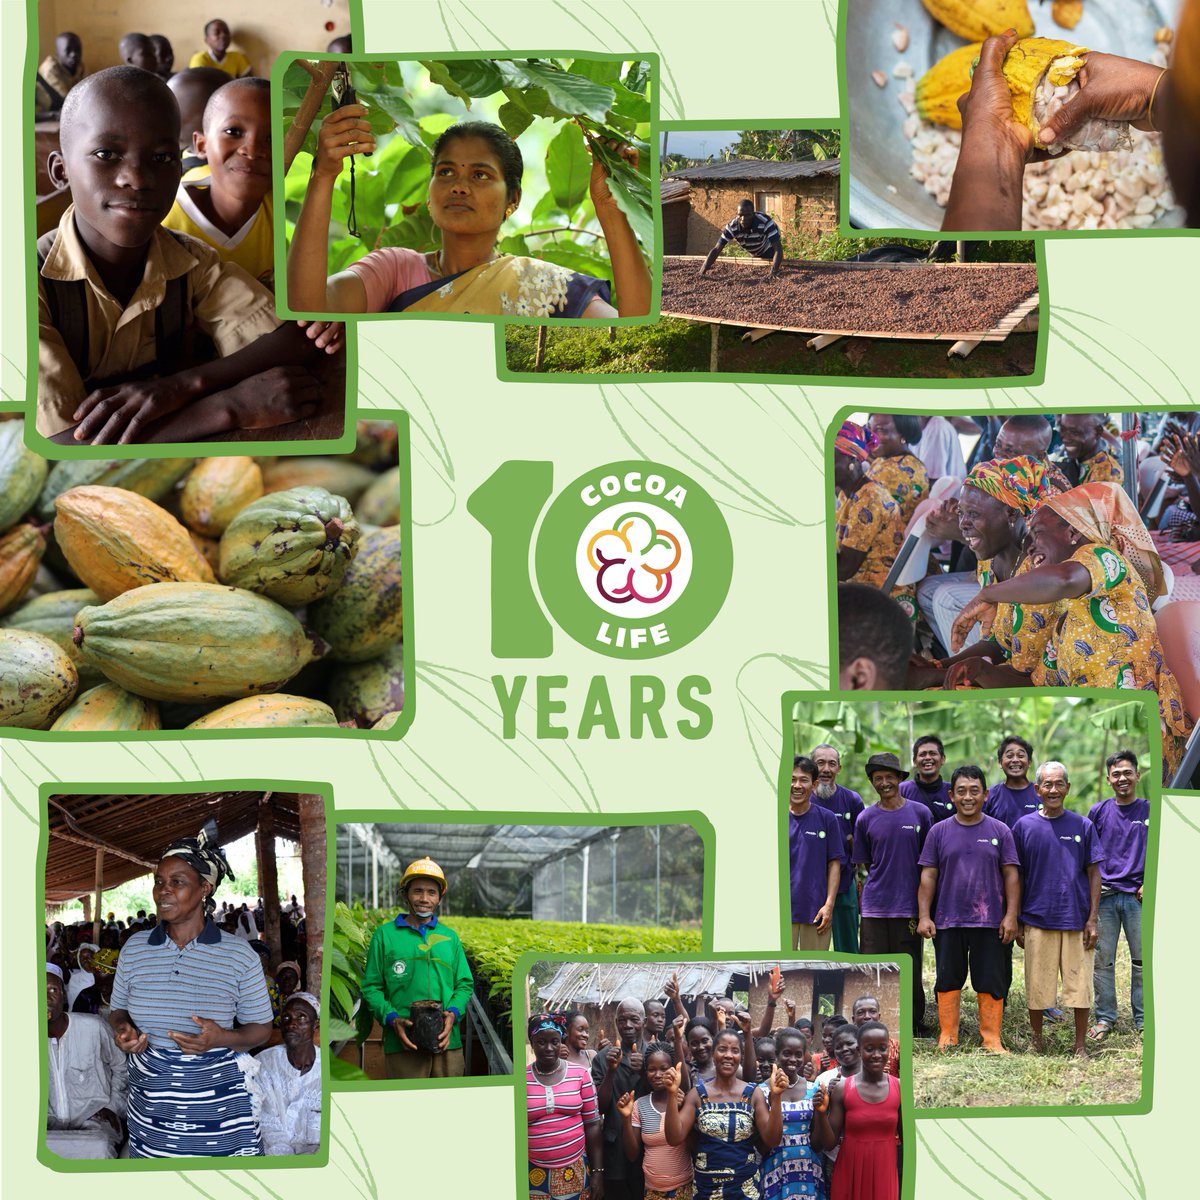 #CocoaLife turns 10! In 2012 we pioneered an integrated approach to cocoa sustainability. A decade on we’re proud to have exceeded our 2022 goals; investing $404M to reach almost 210K farmers, in 2.5K communities, across 6 countries. #teamMDLZ Learn more: https://t.co/jYtdmH6skT https://t.co/hhijNtsSuq